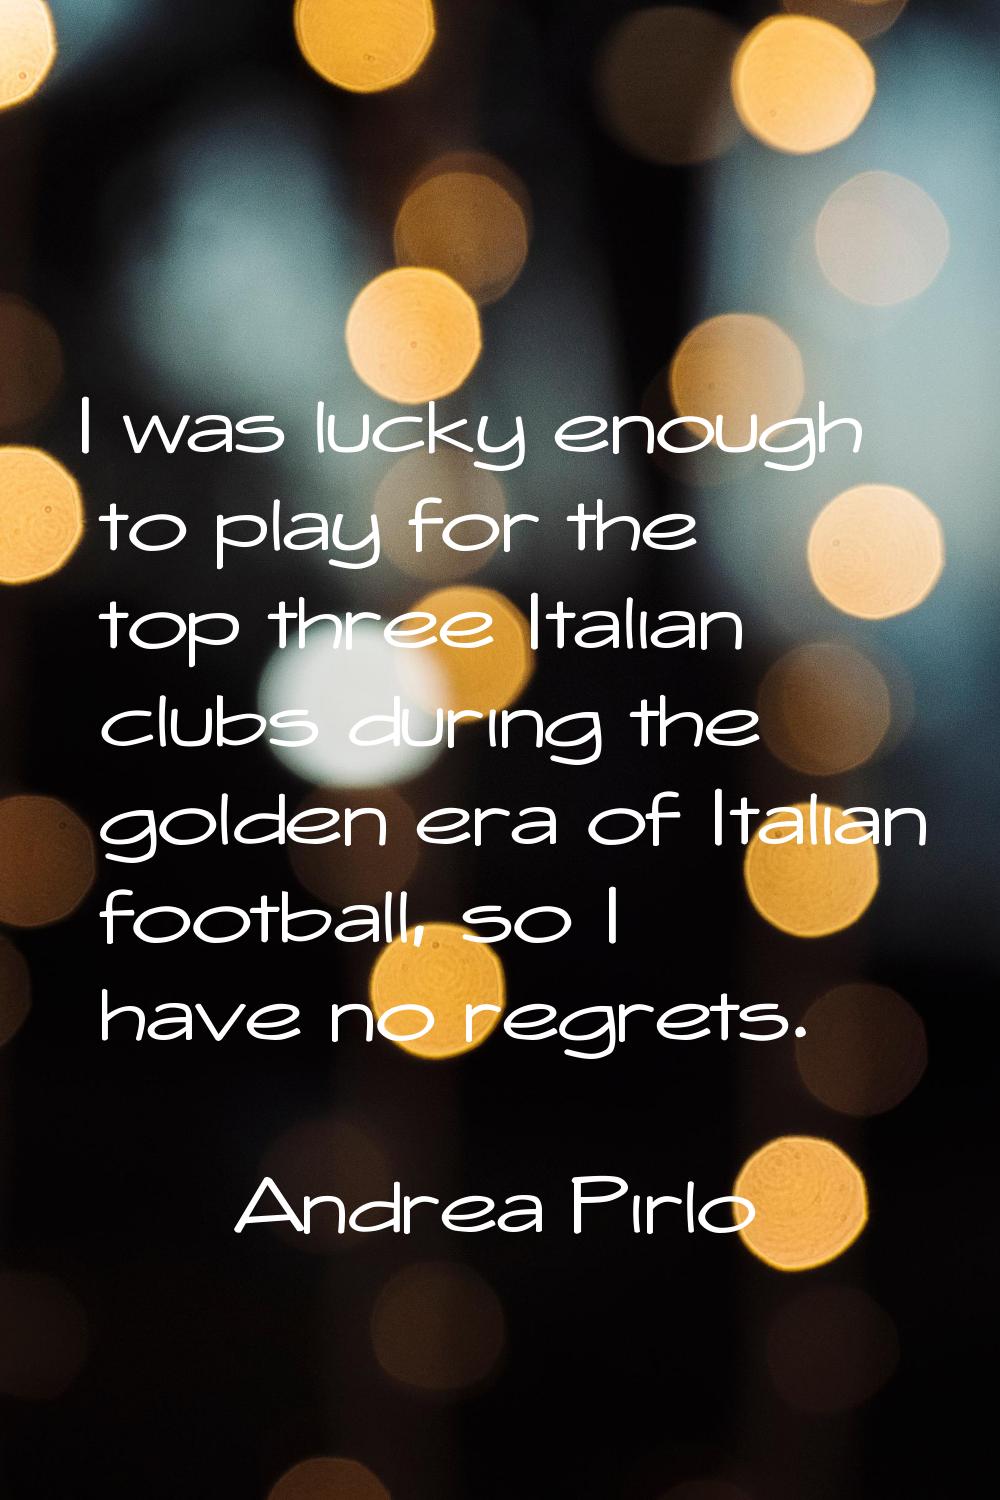 I was lucky enough to play for the top three Italian clubs during the golden era of Italian footbal